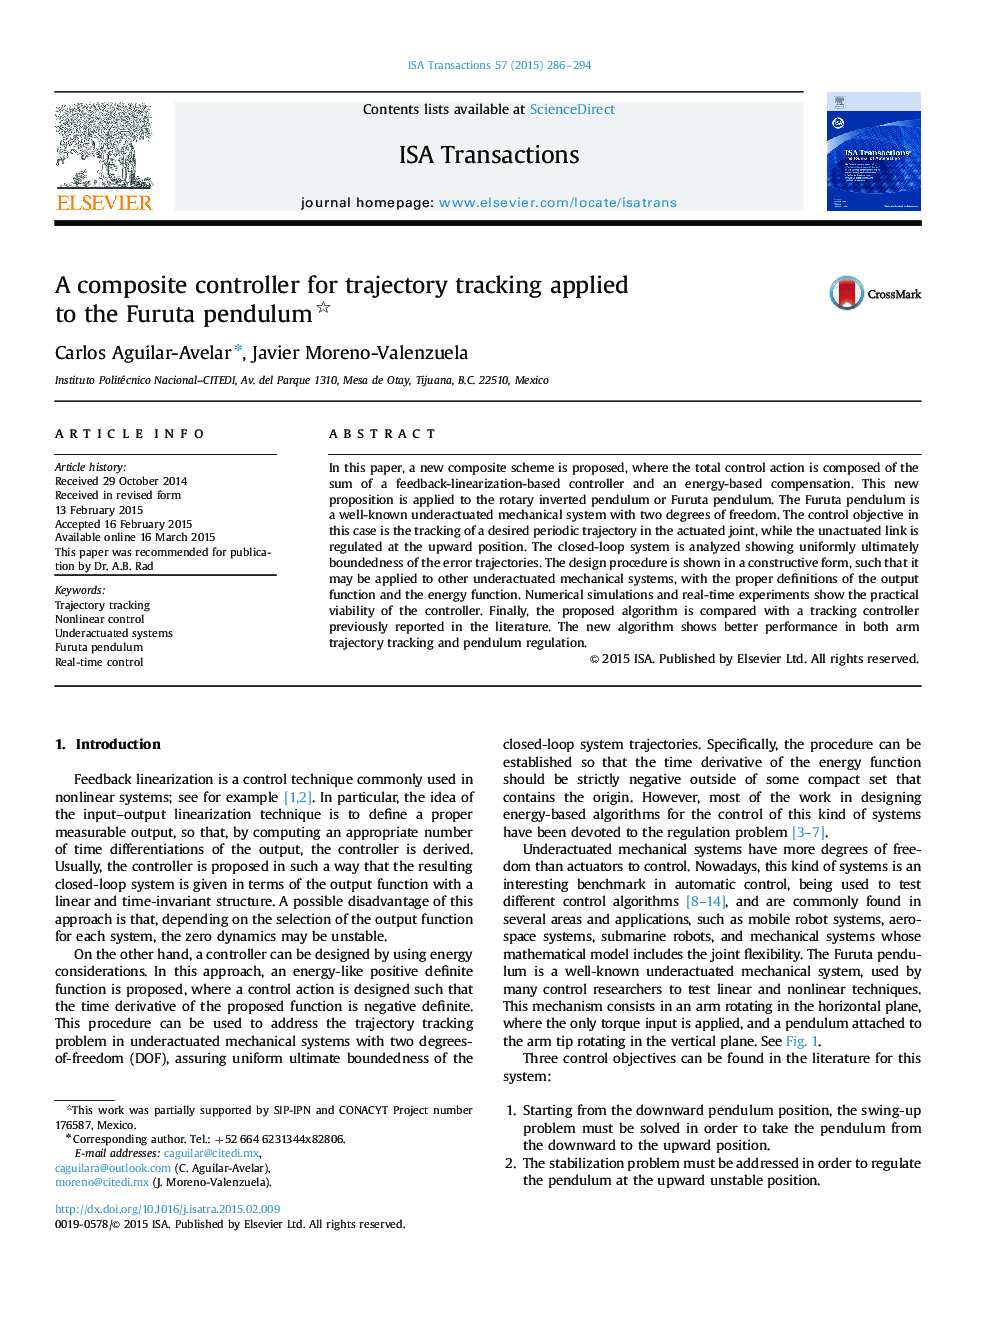 Research ArticleA composite controller for trajectory tracking applied to the Furuta pendulum